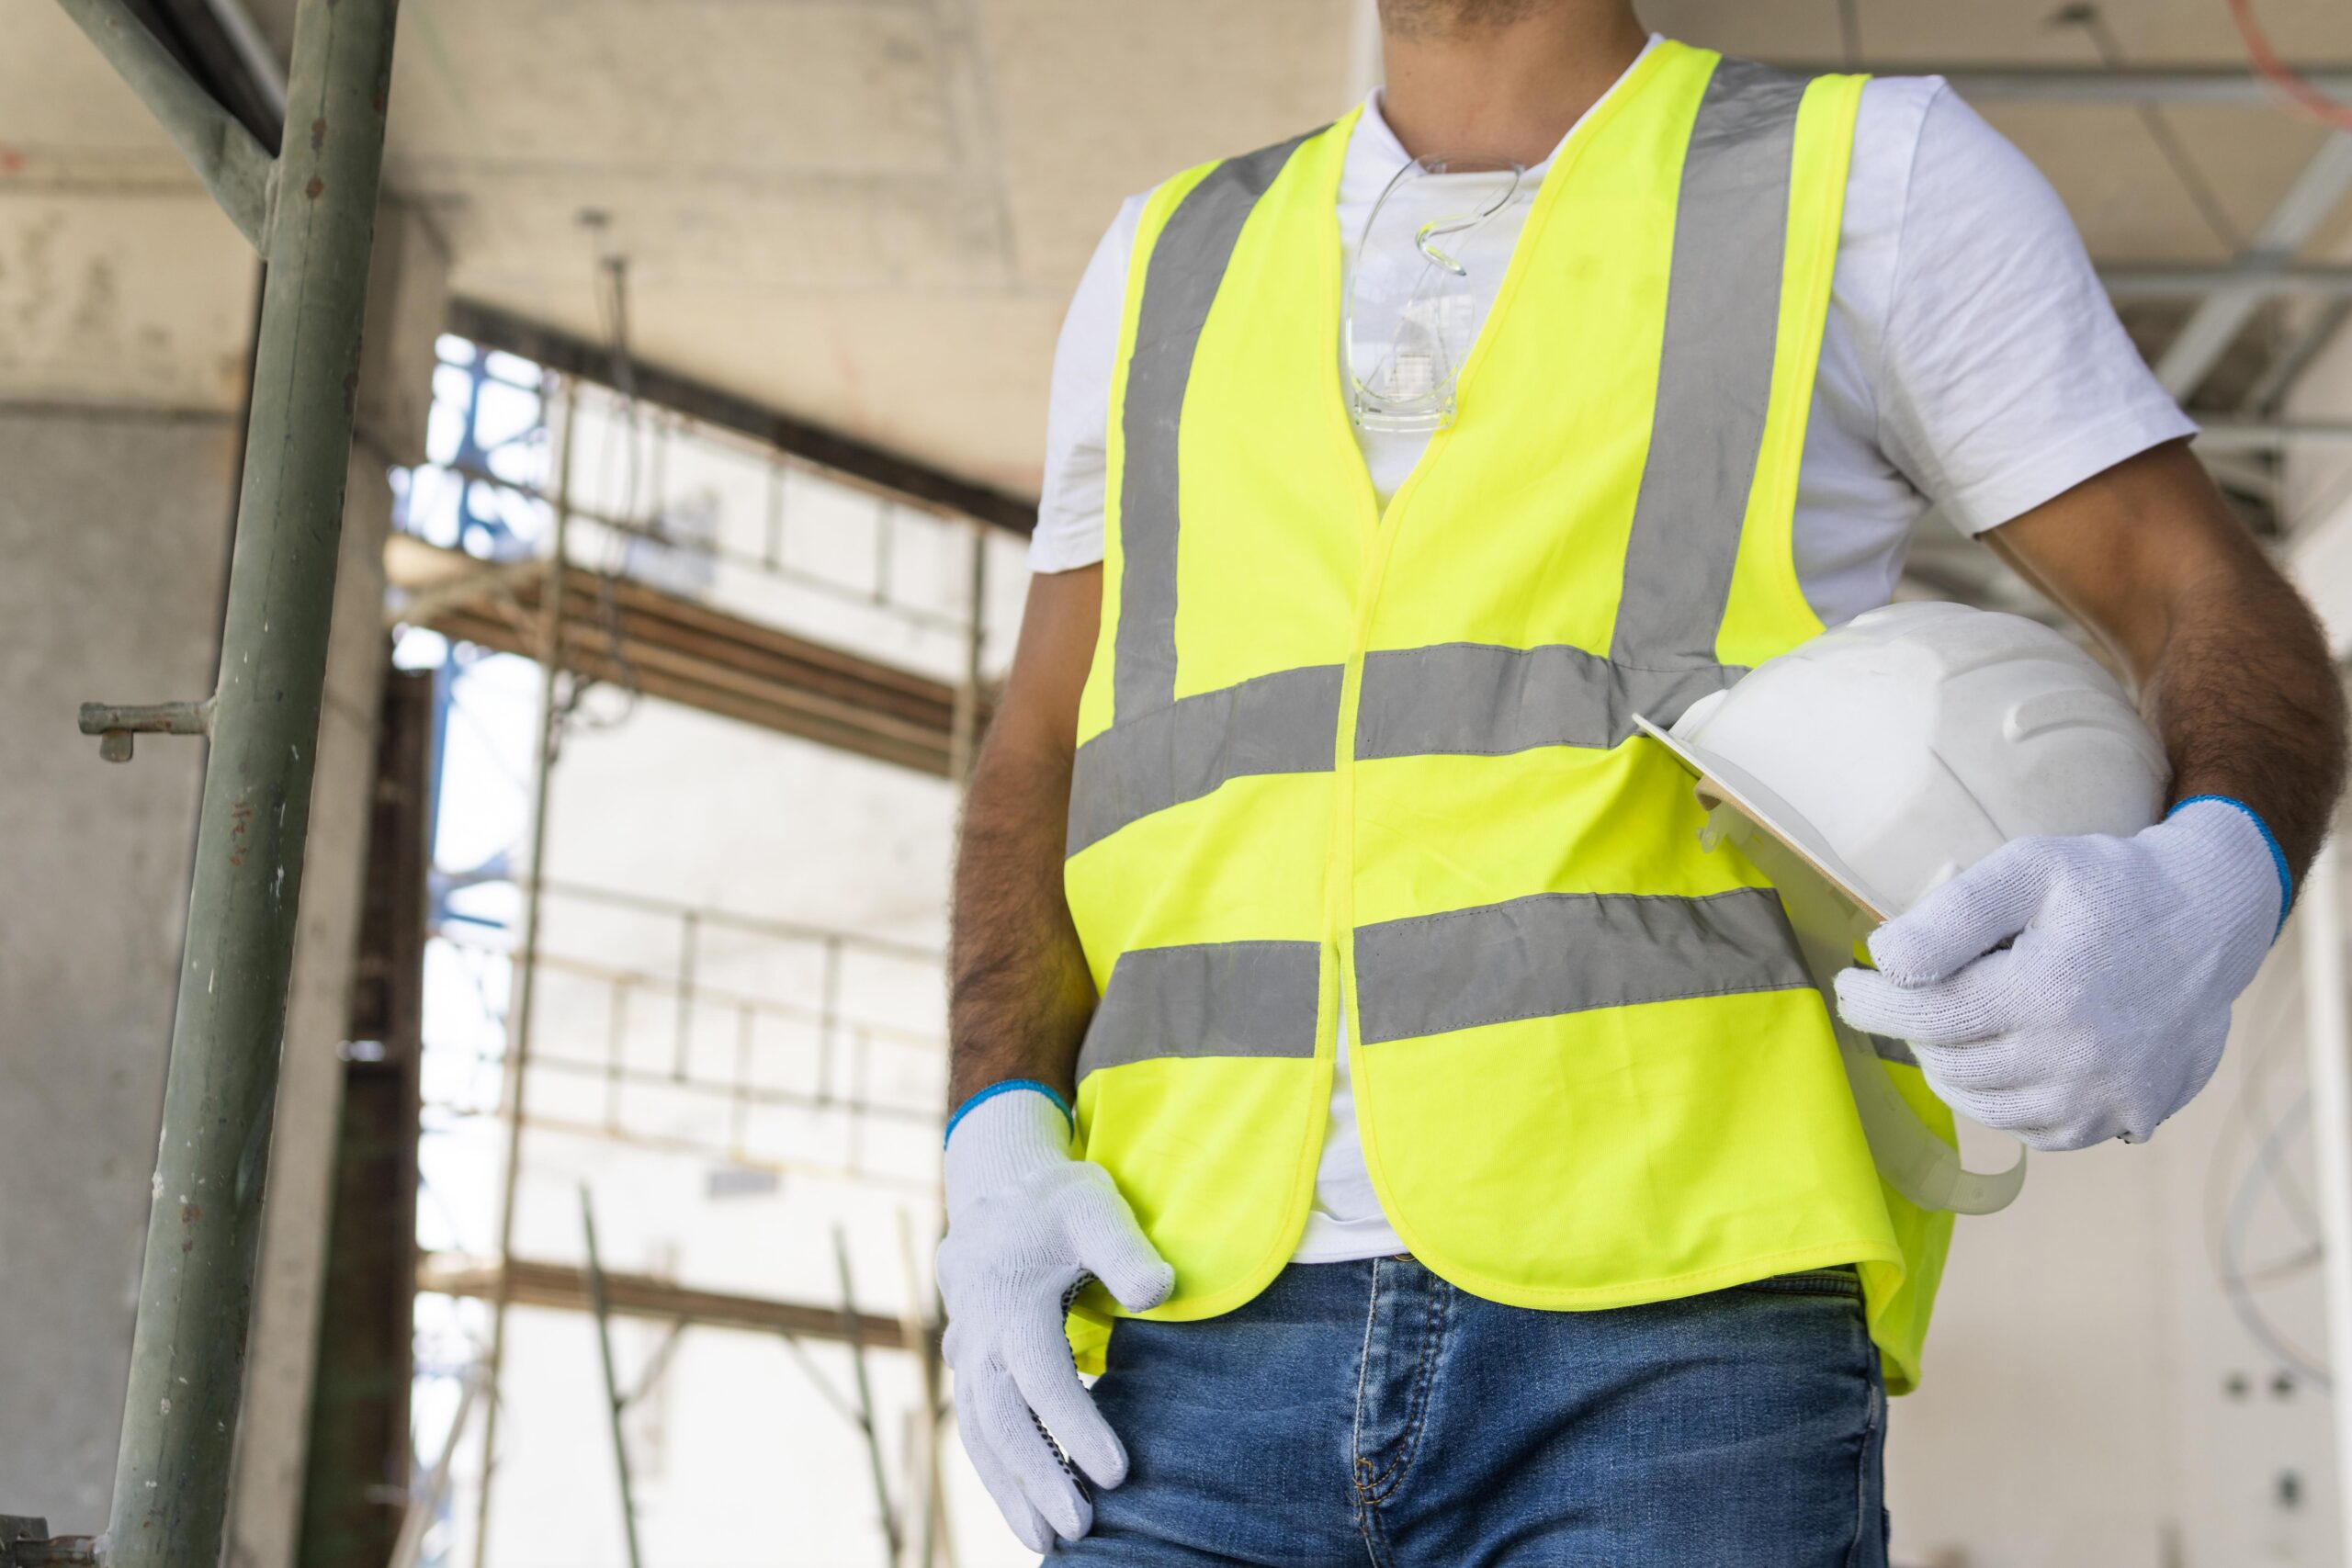 Work clothing and safety equipment